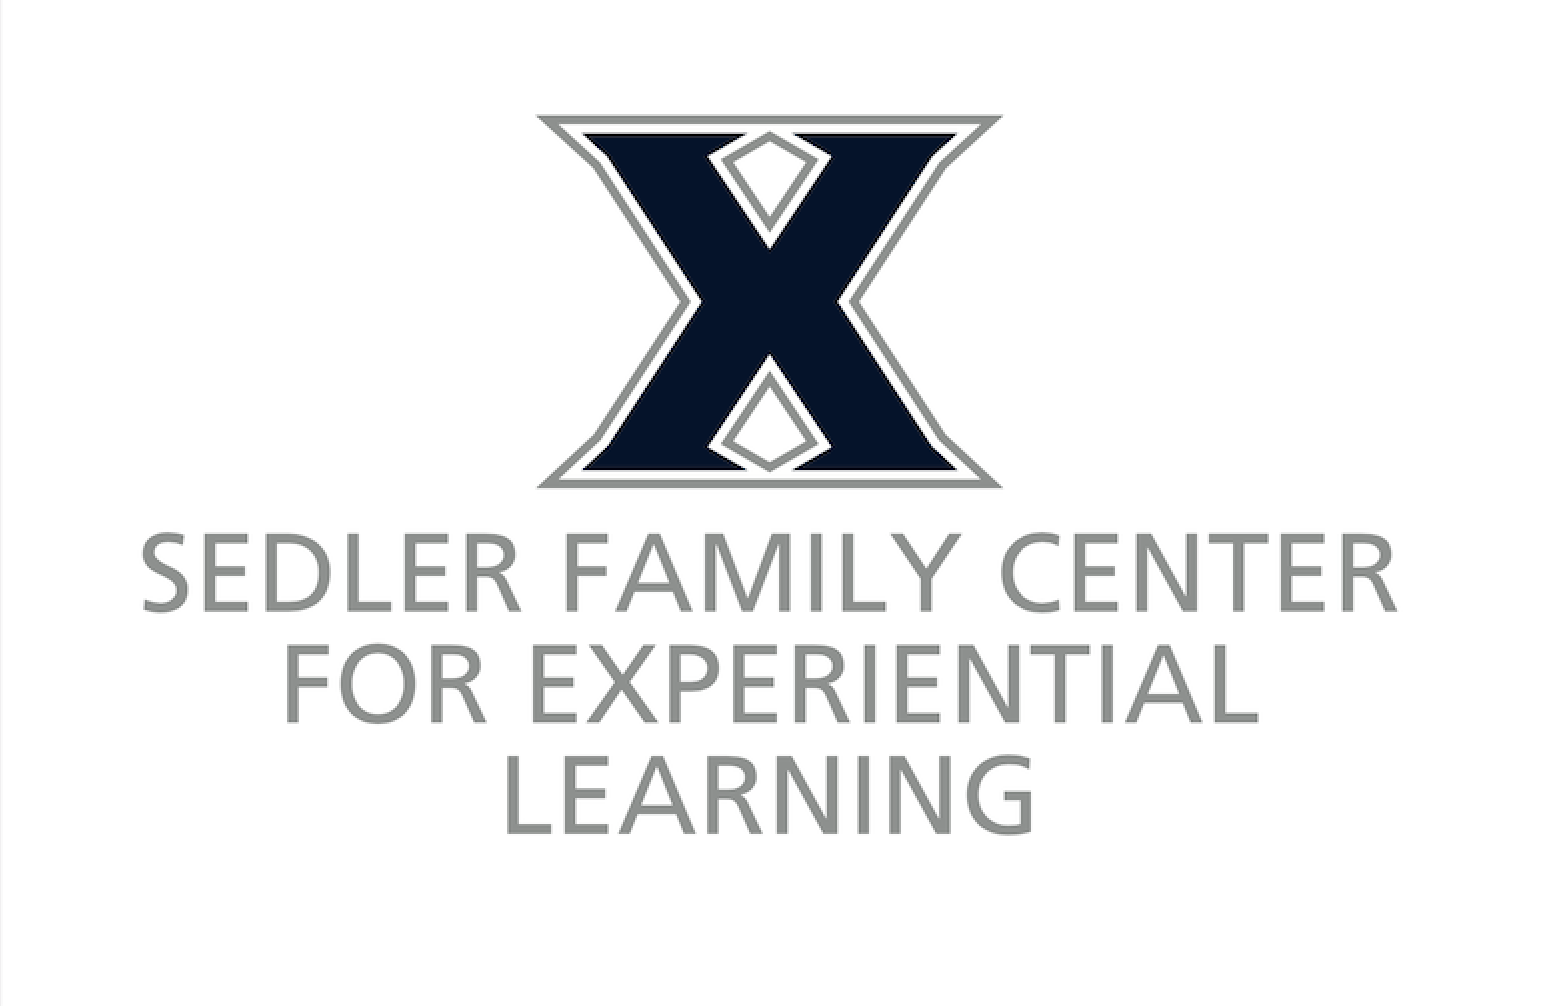 Blue and gray 'X' logo over text "Sedler Family Center for Experiential Learning"